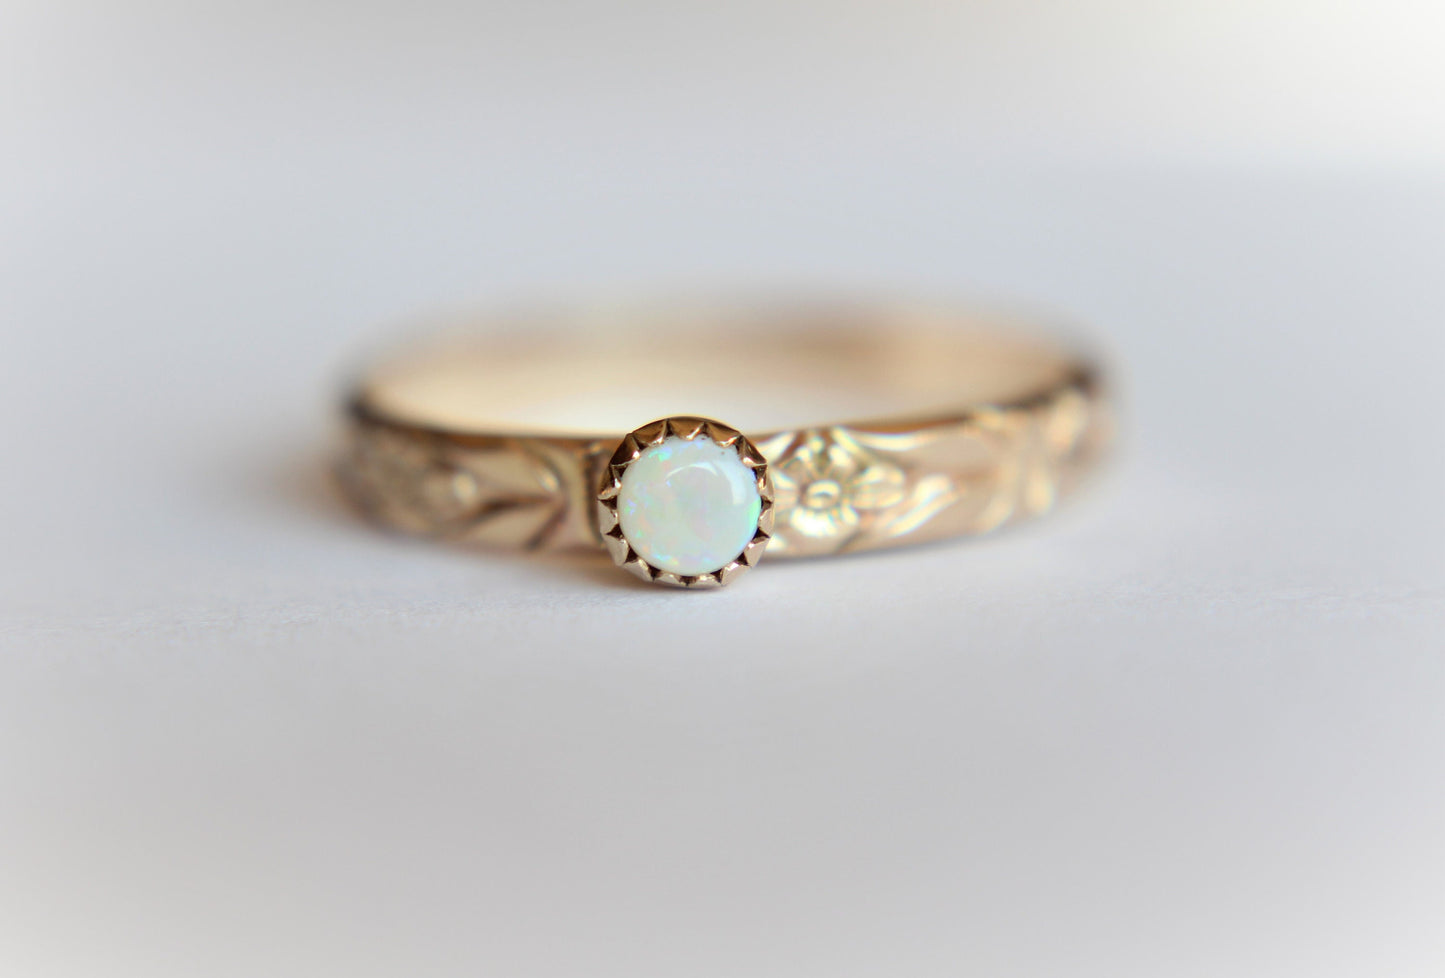 Opal Ring, Gold Opal Ring, Engagement Ring, Opal Engagement Ring, June Birthstone, Gemstone Stacking Ring, White Opal Ring, Gift, Natural